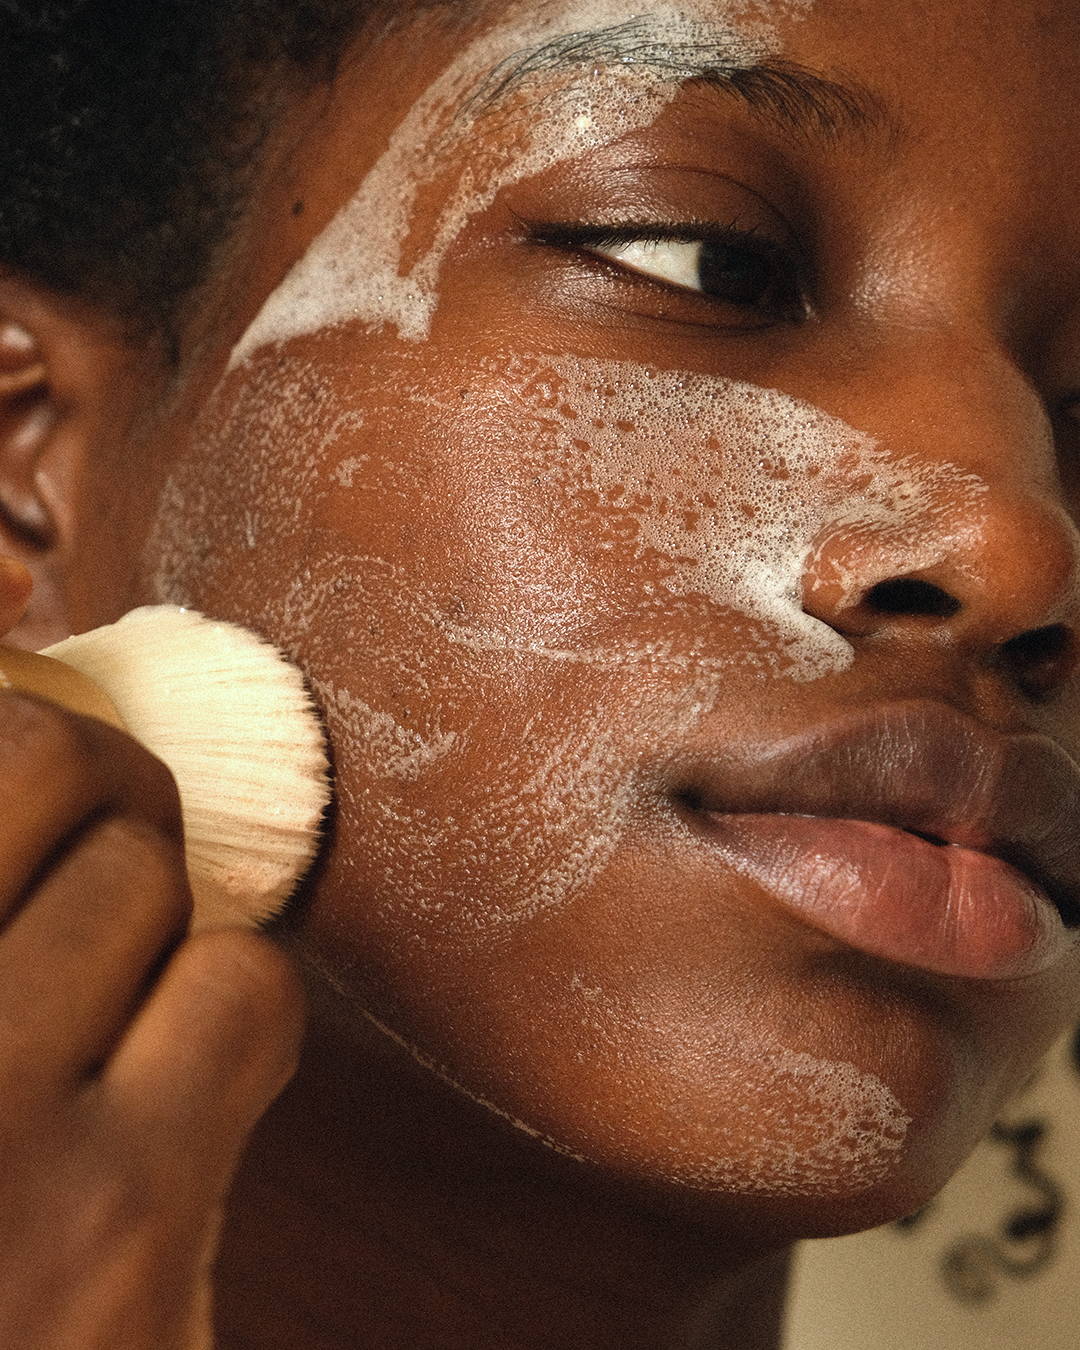 Our tips for an effective homemade face scrub picture